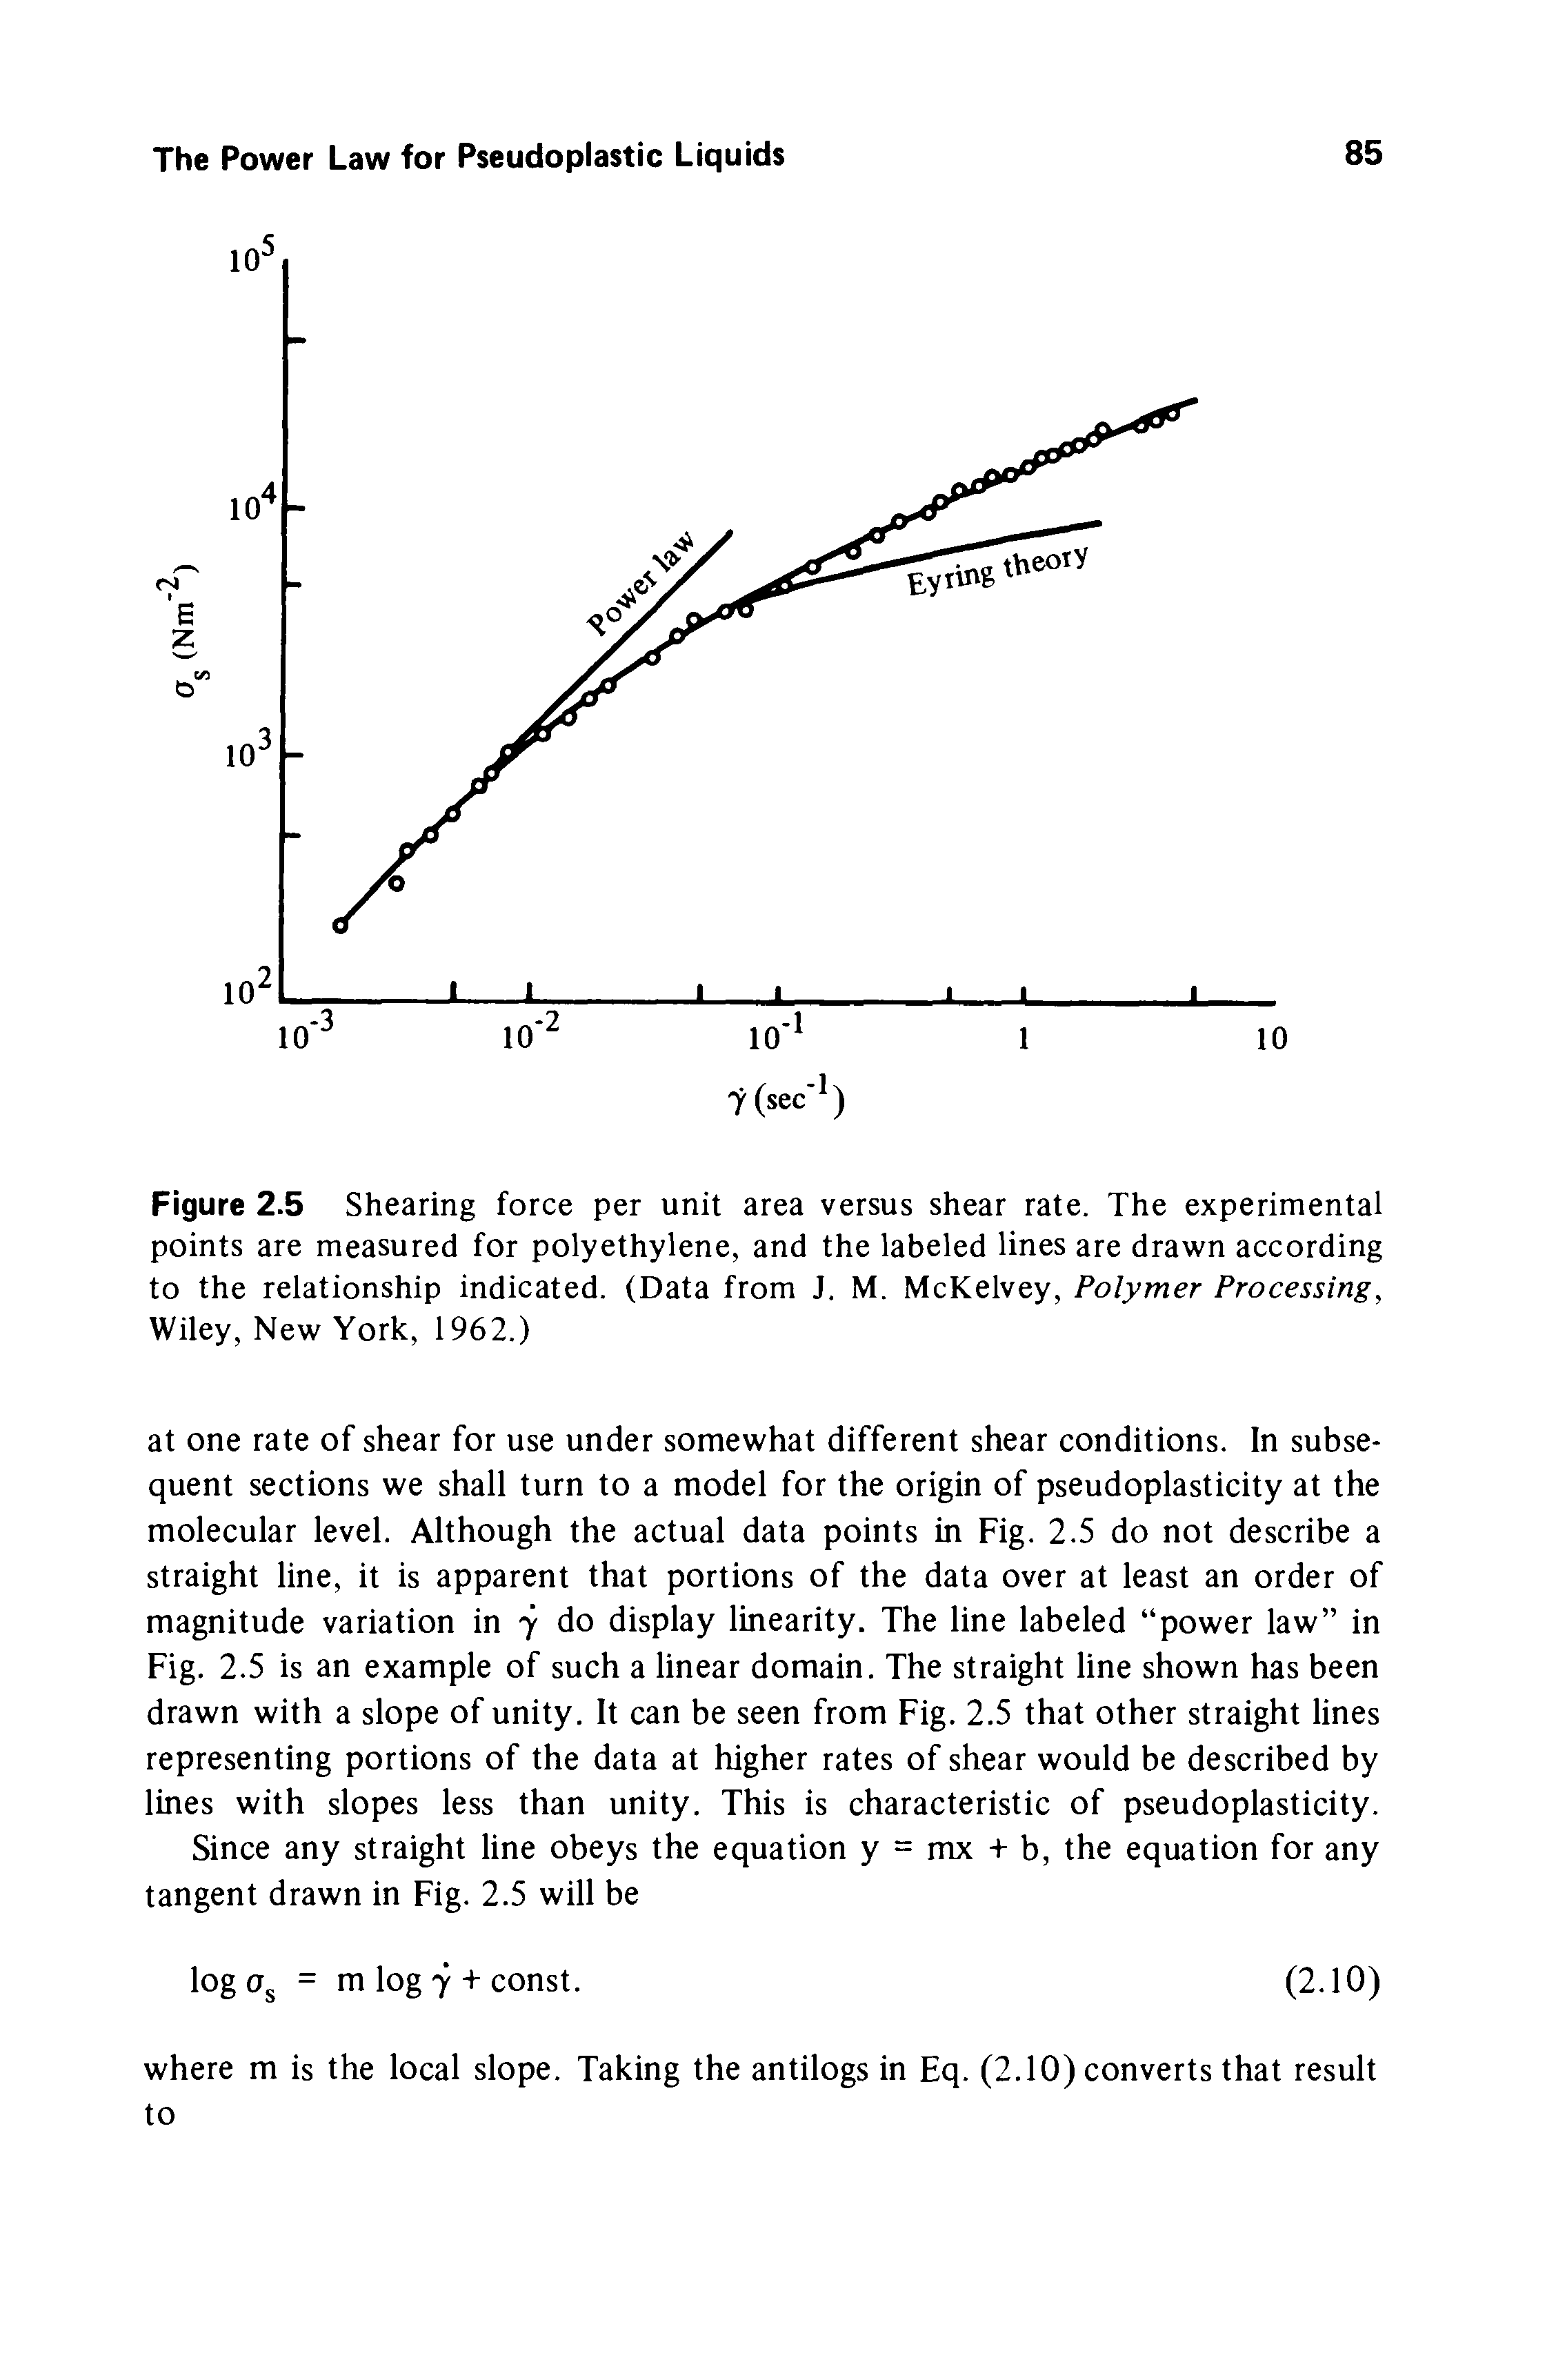 Figure 2.5 Shearing force per unit area versus shear rate. The experimental points are measured for polyethylene, and the labeled lines are drawn according to the relationship indicated. (Data from J. M. McKelvey, Polymer Processing, Wiley, New York, 1962.)...